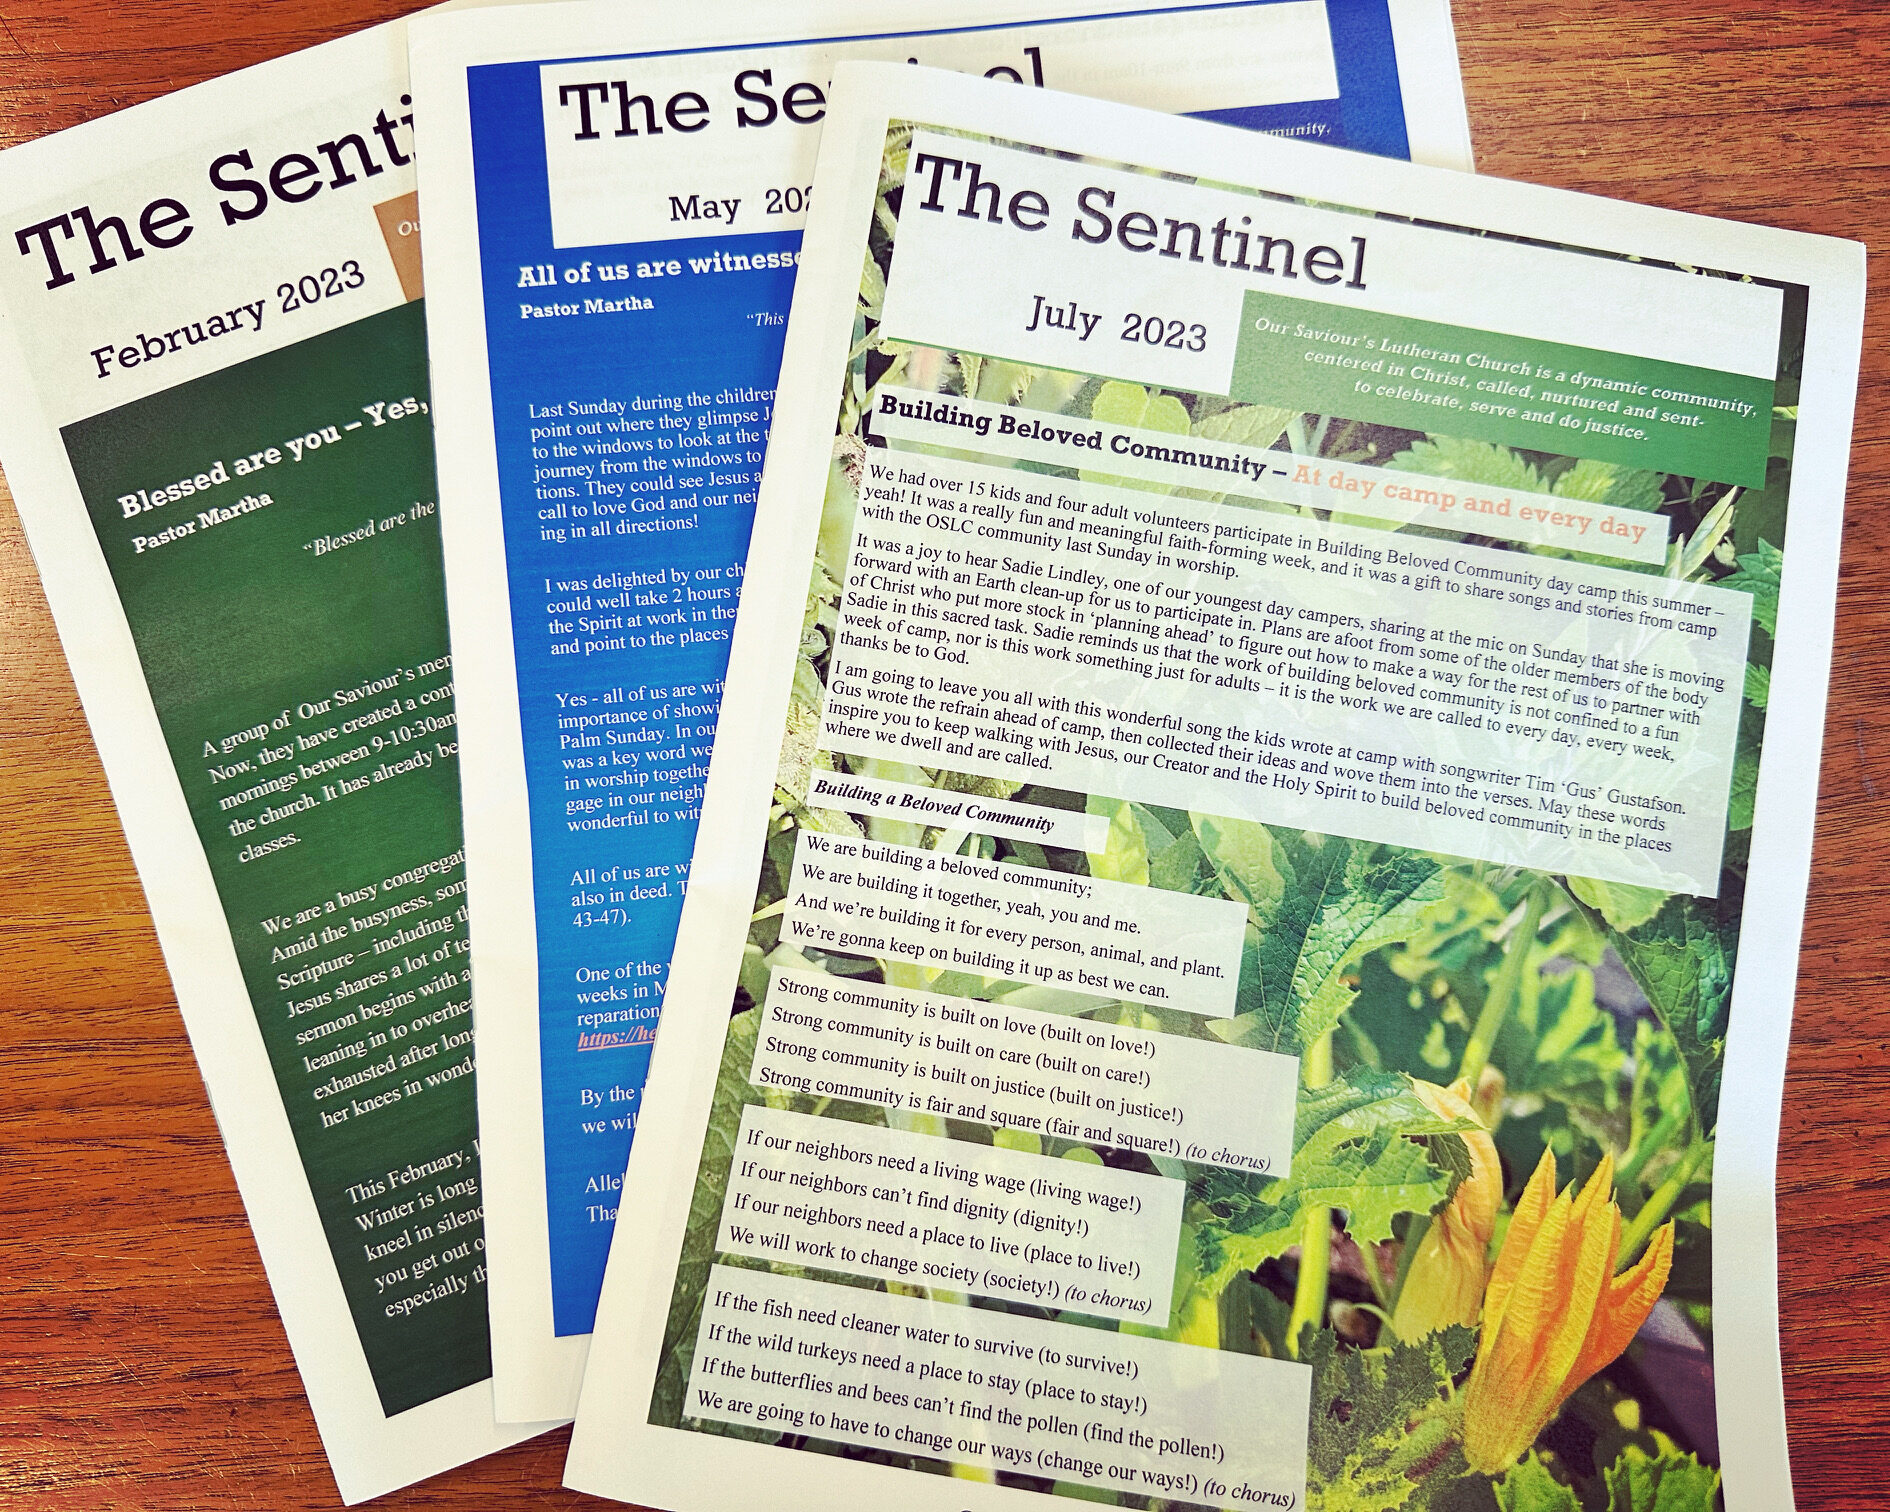 The Sentinel Newsletter - Our Saviour's Lutheran Church